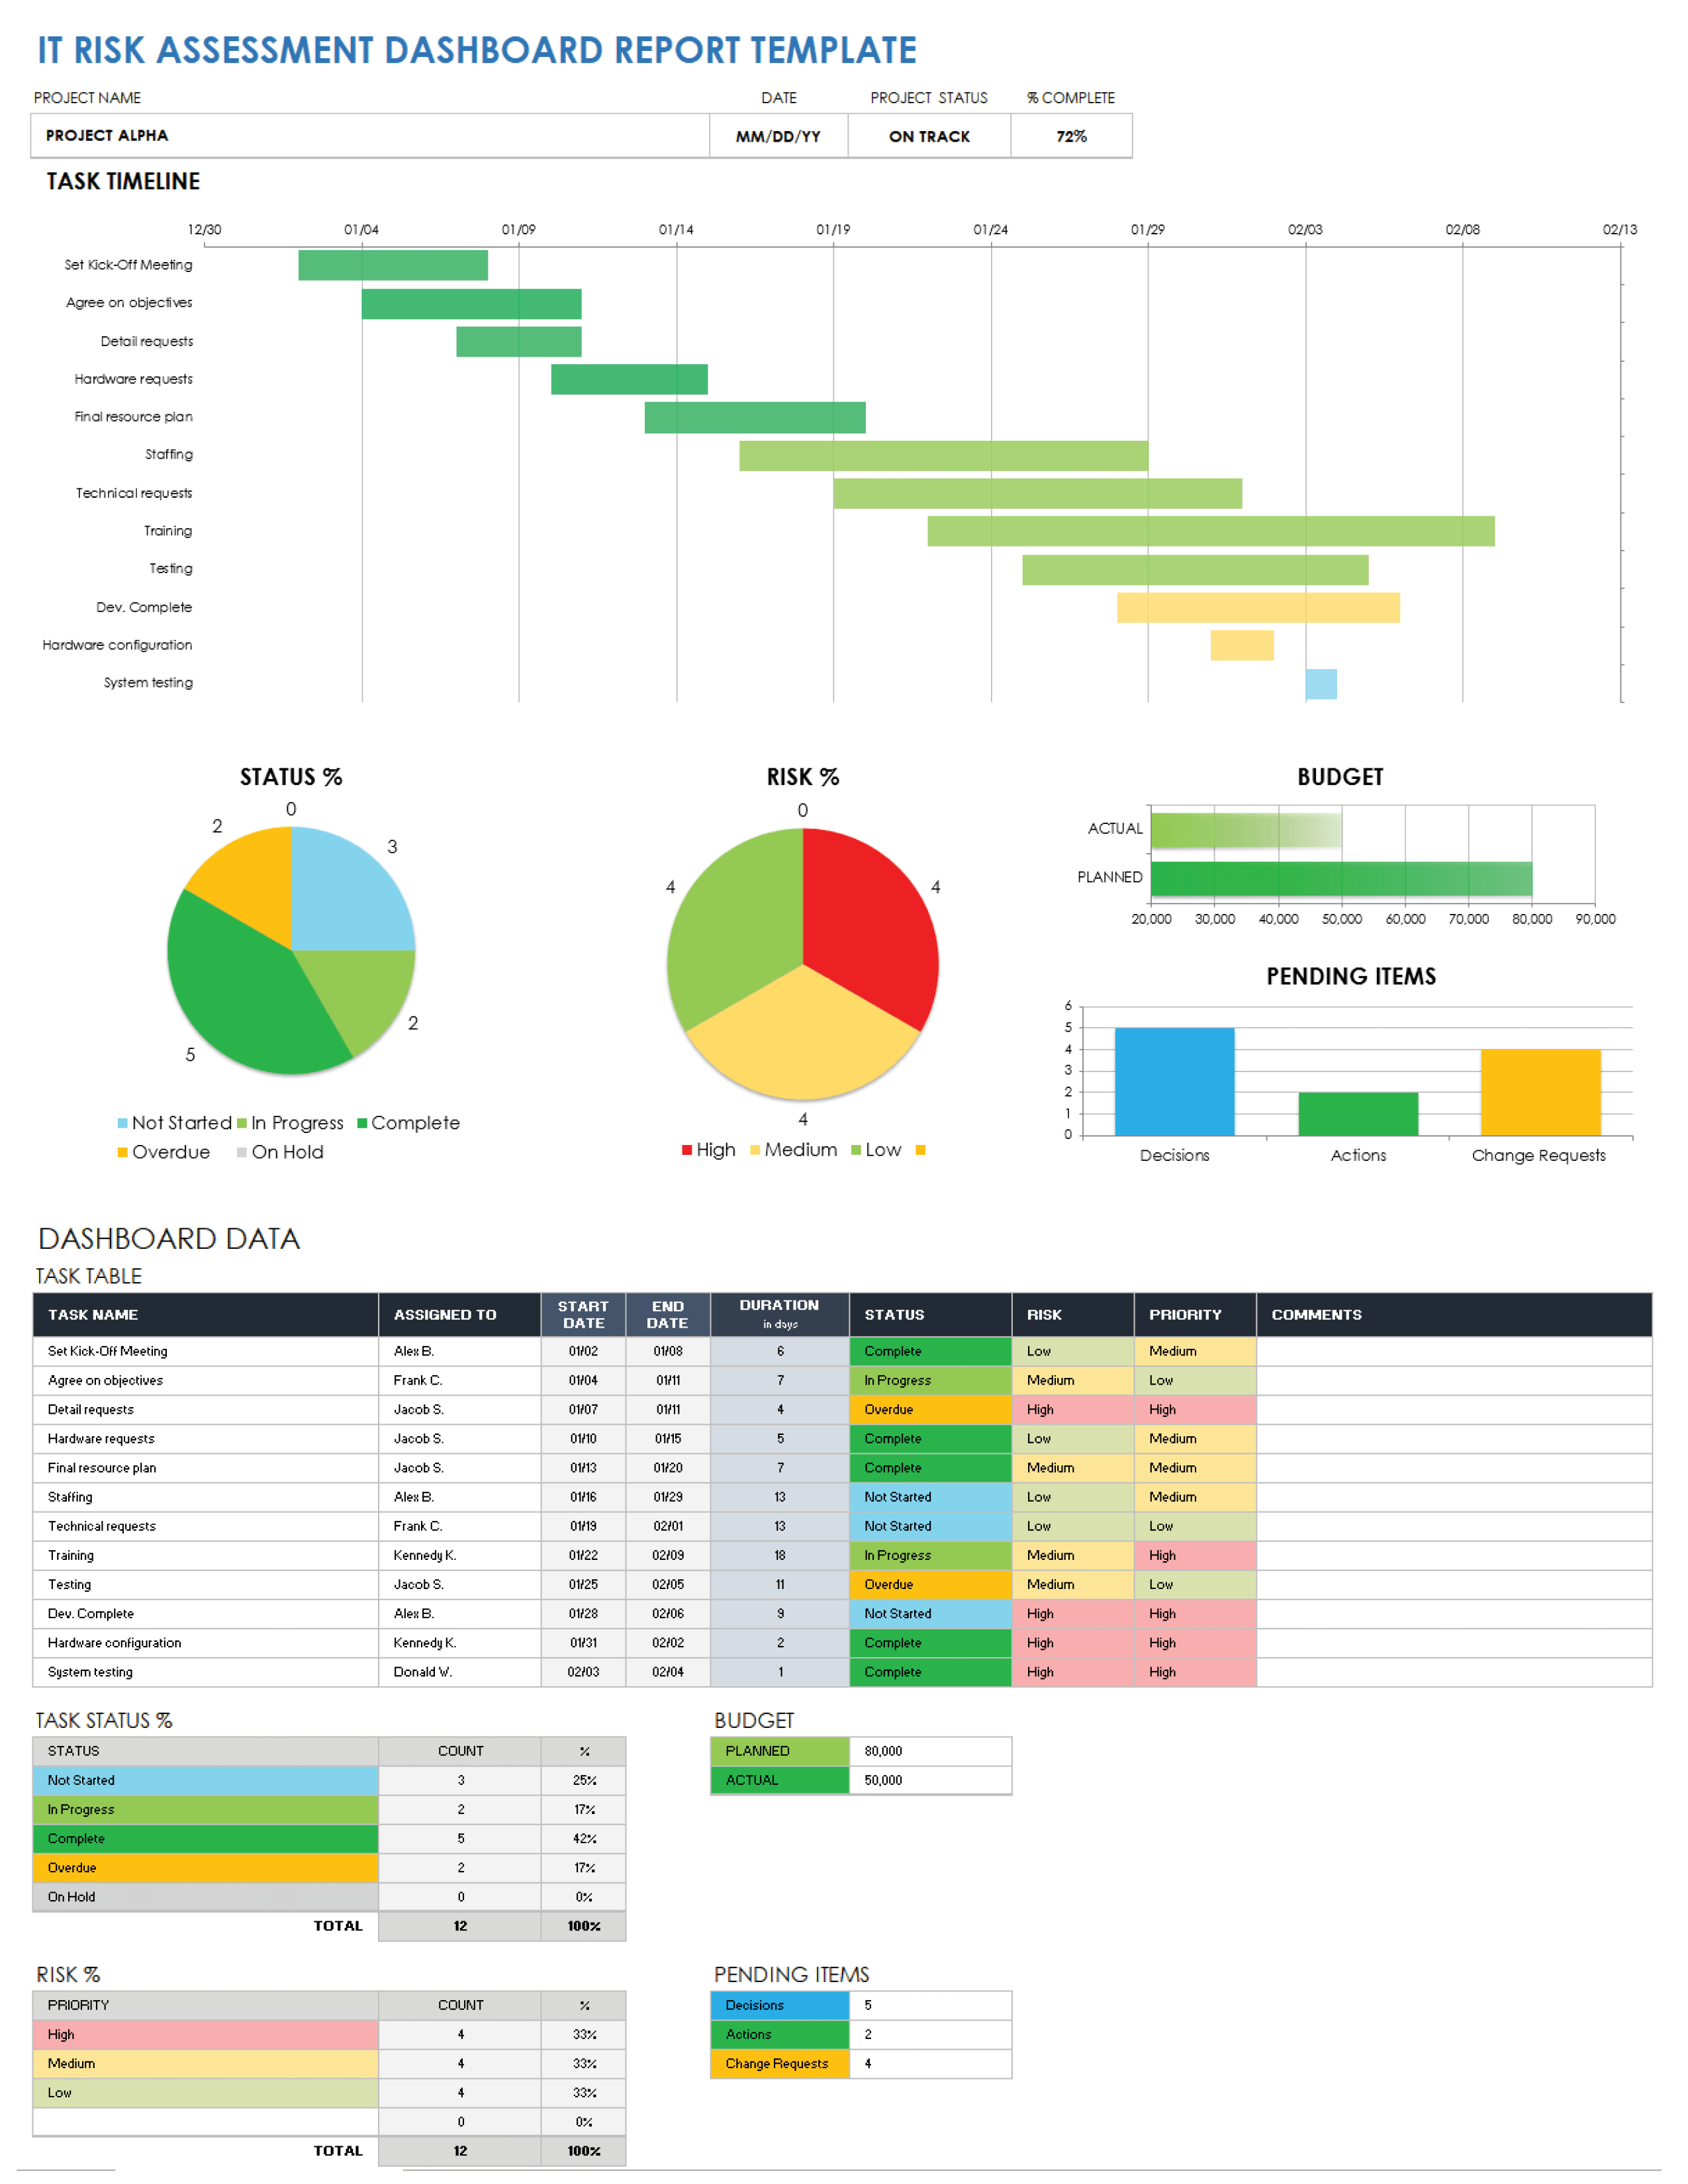 IT Risk Assessment Dashboard Report Template